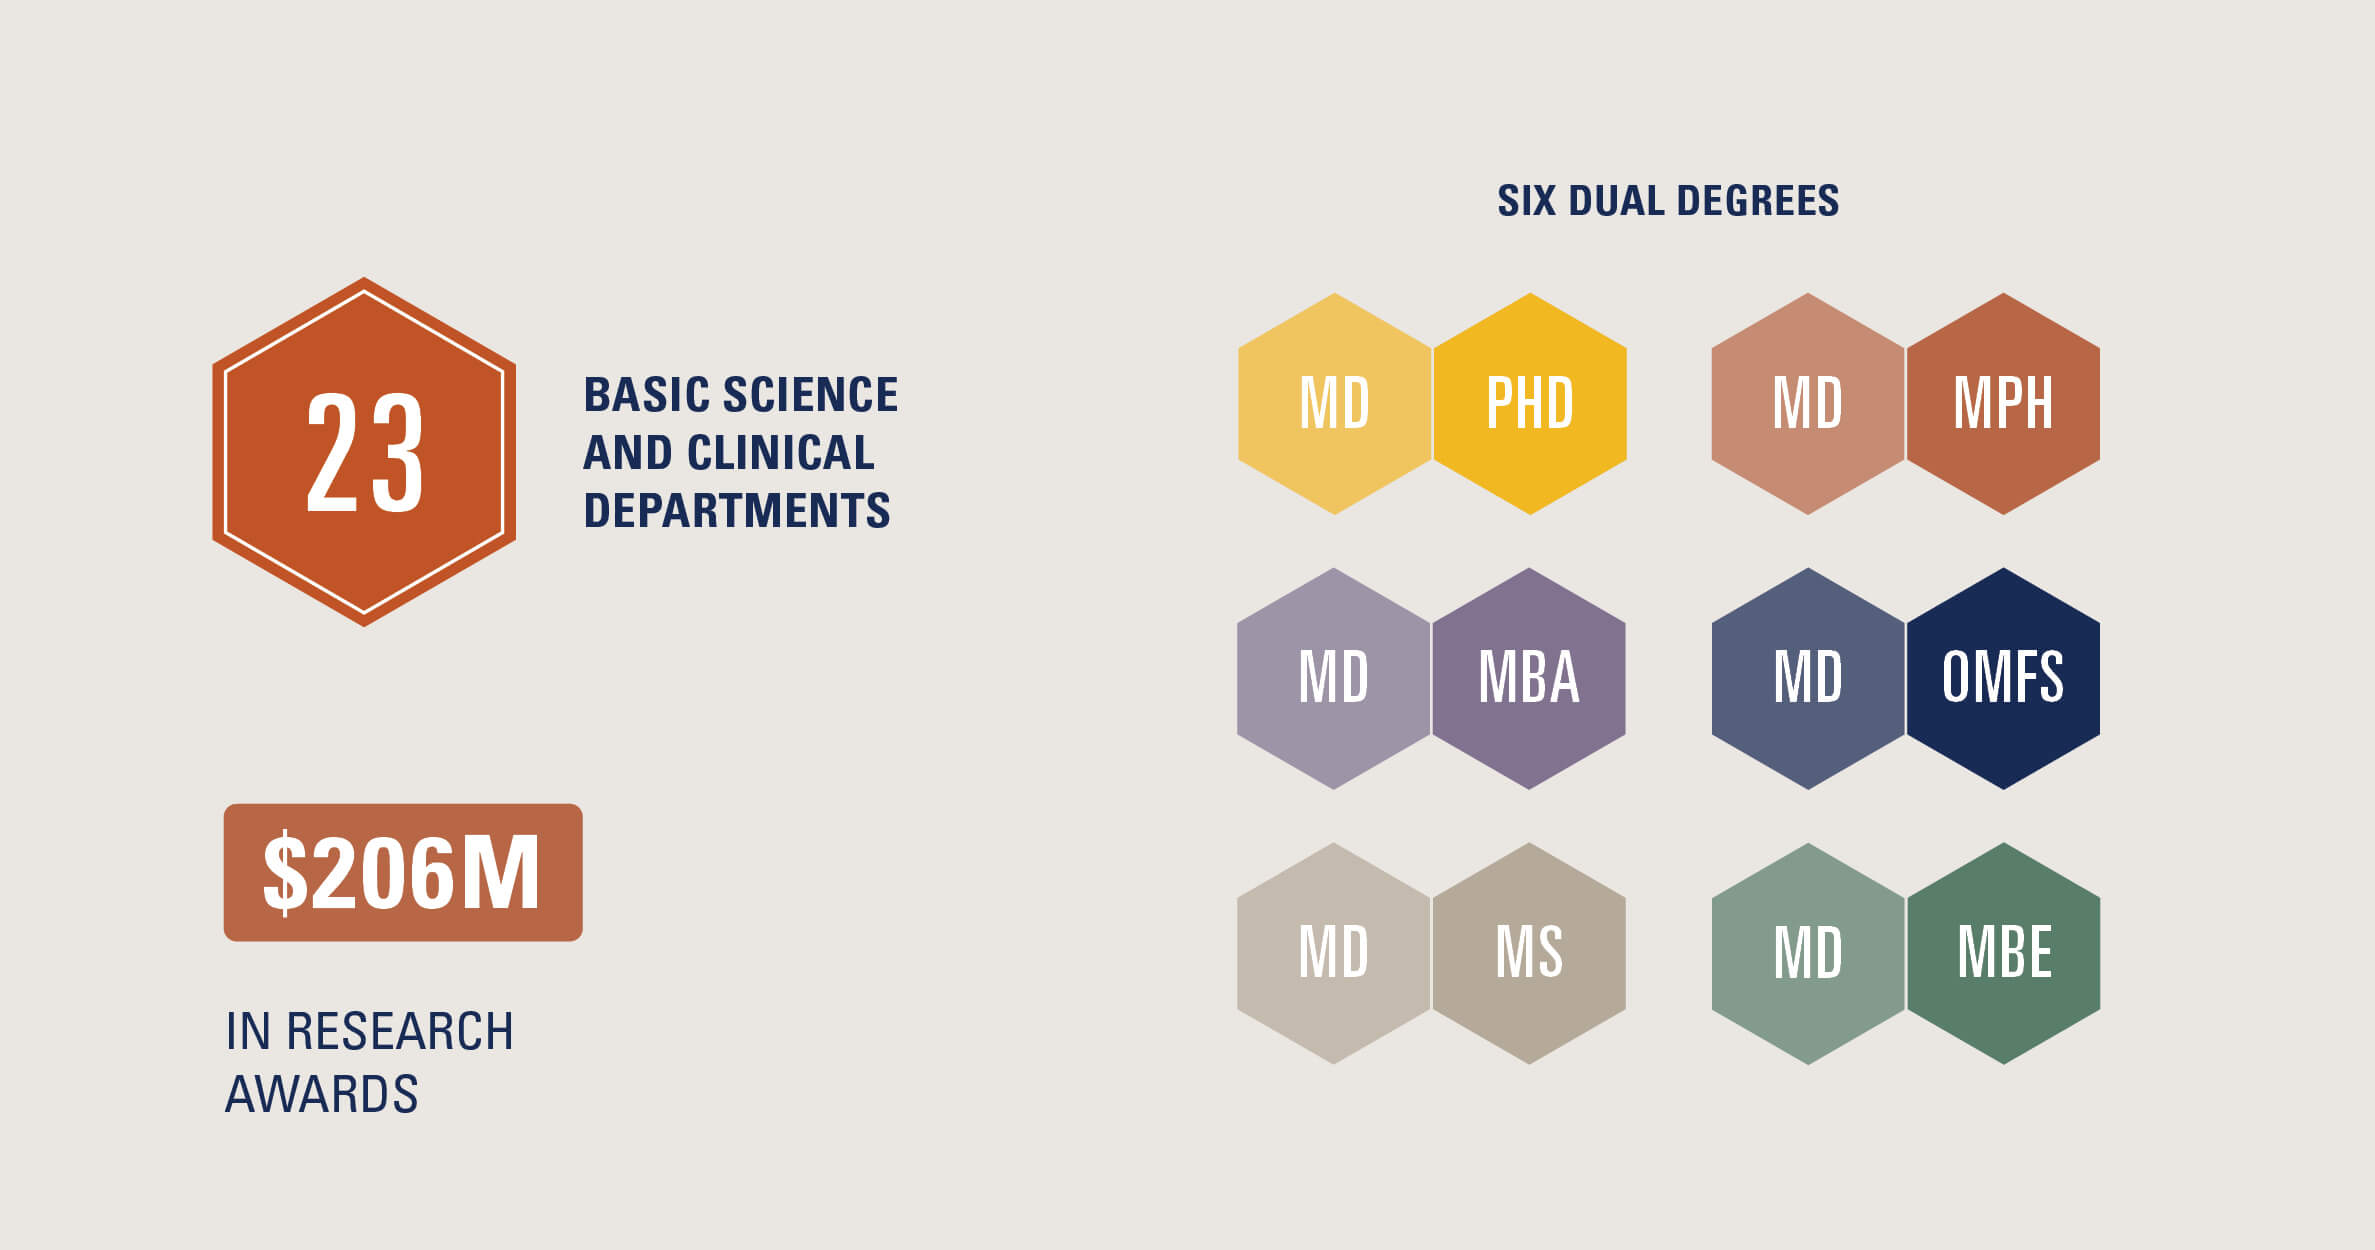 Statistics representing six dual degrees including MD PHD, MD MPH, MD MBA, MD OMFS, MD MS and MD MBE